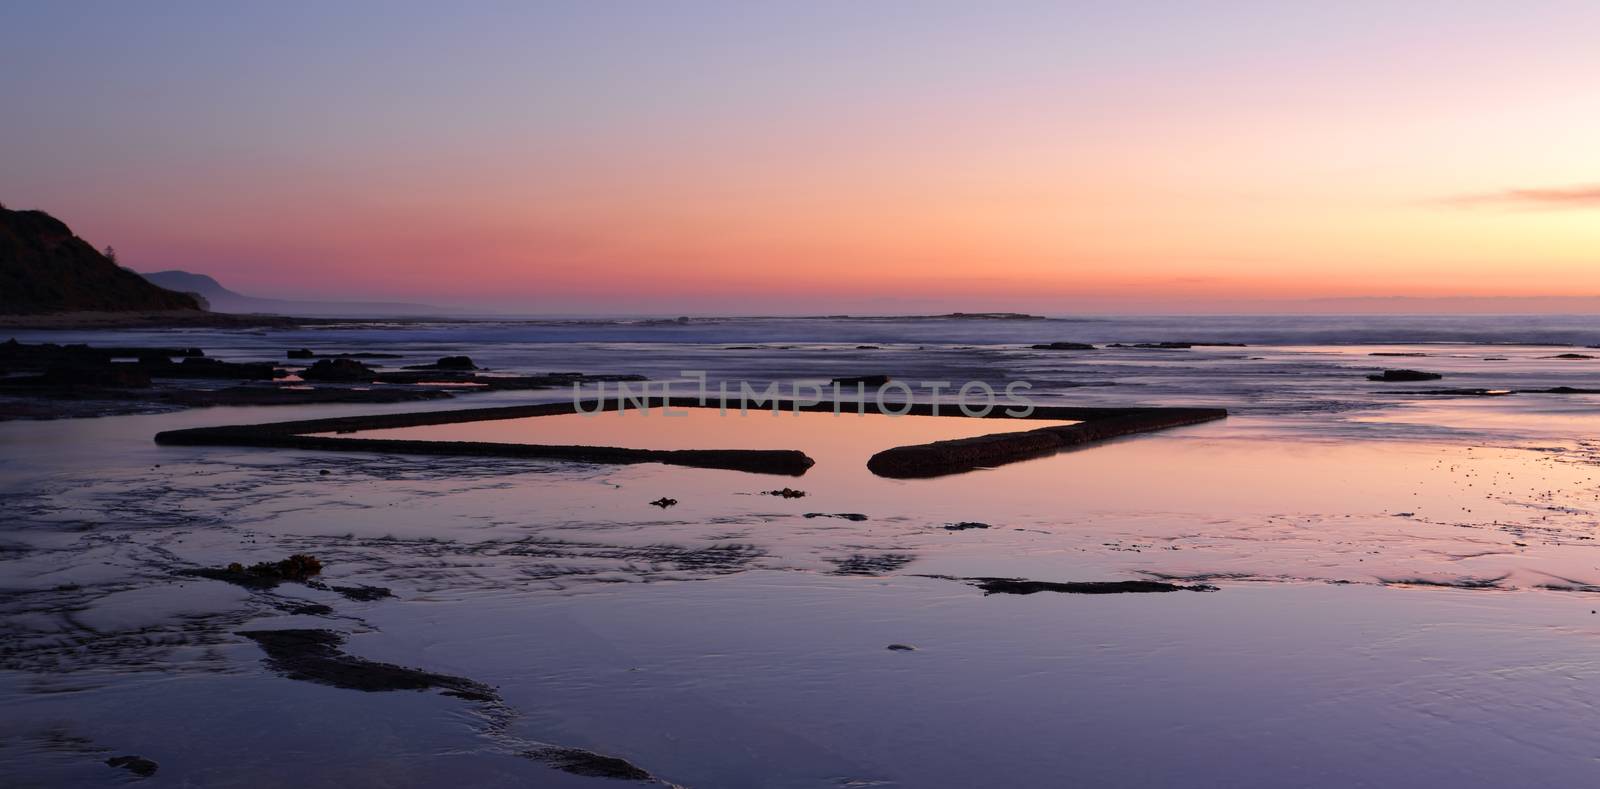 The Wading Pool on the rockshelf at sunrise by lovleah